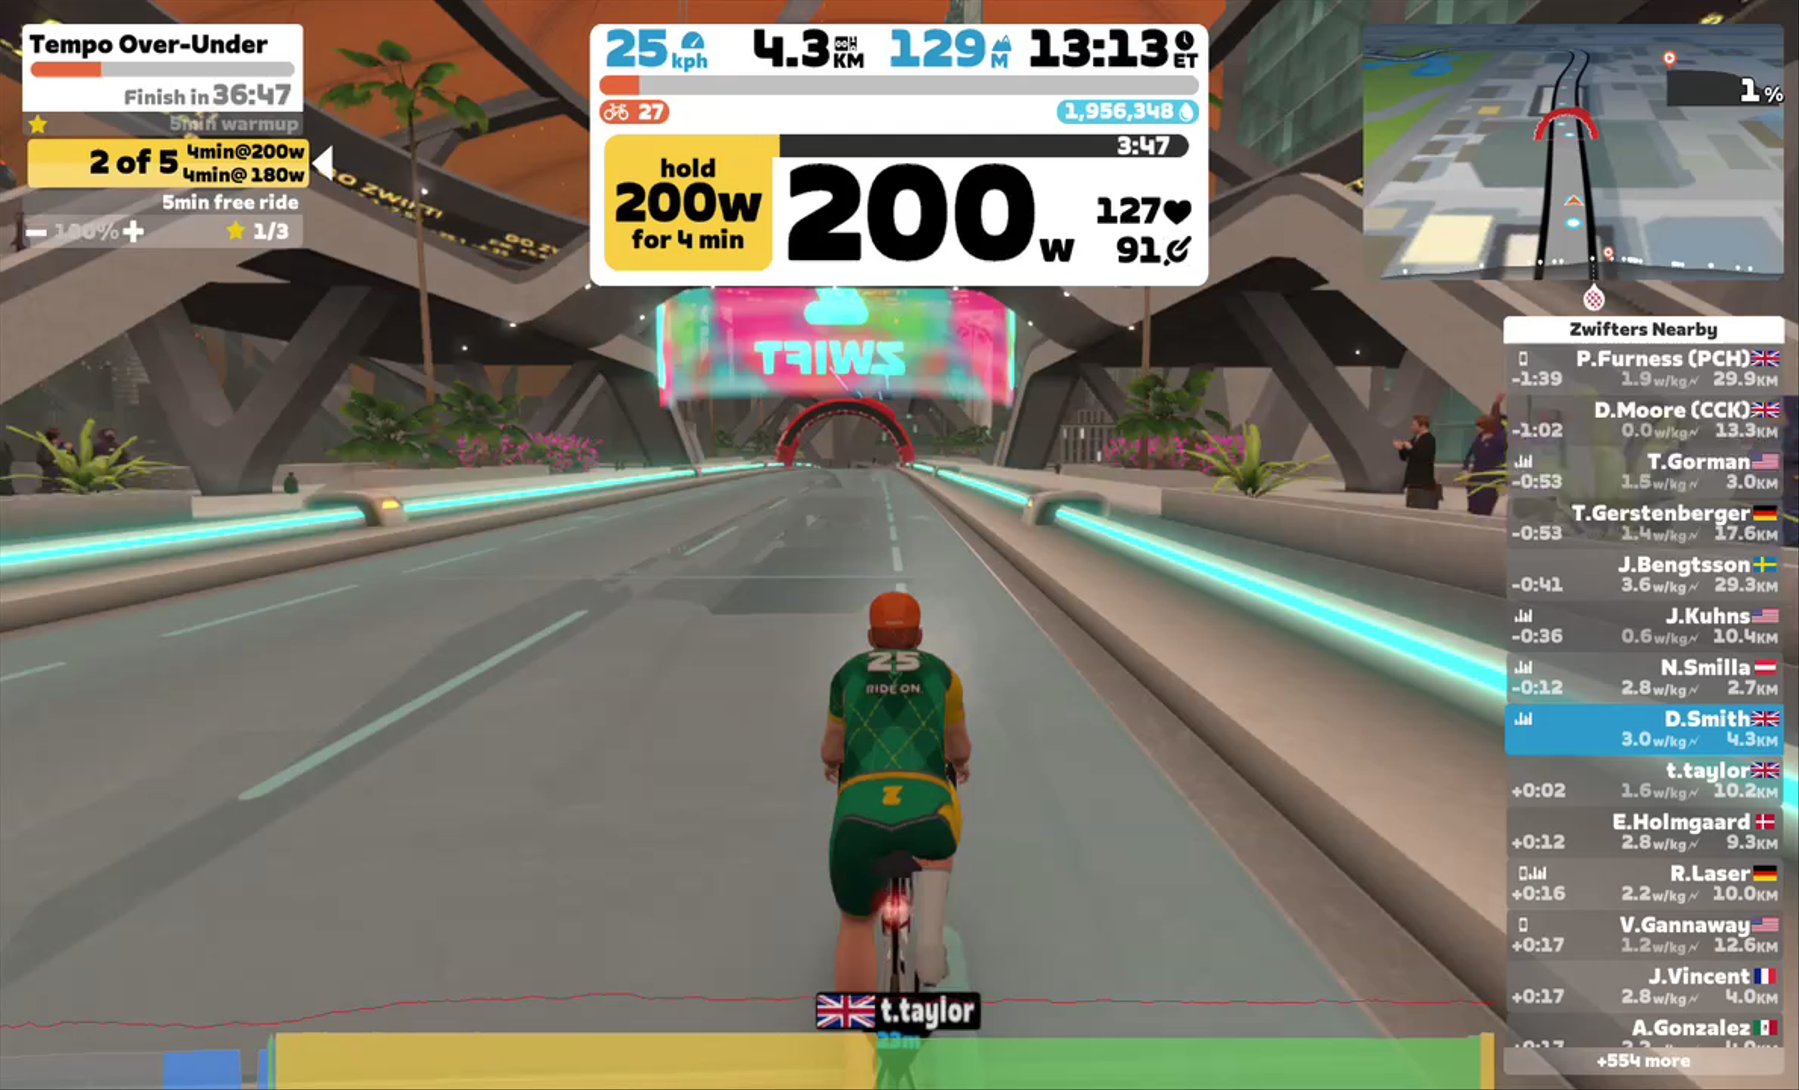 Zwift - Tempo Over-Under in New York